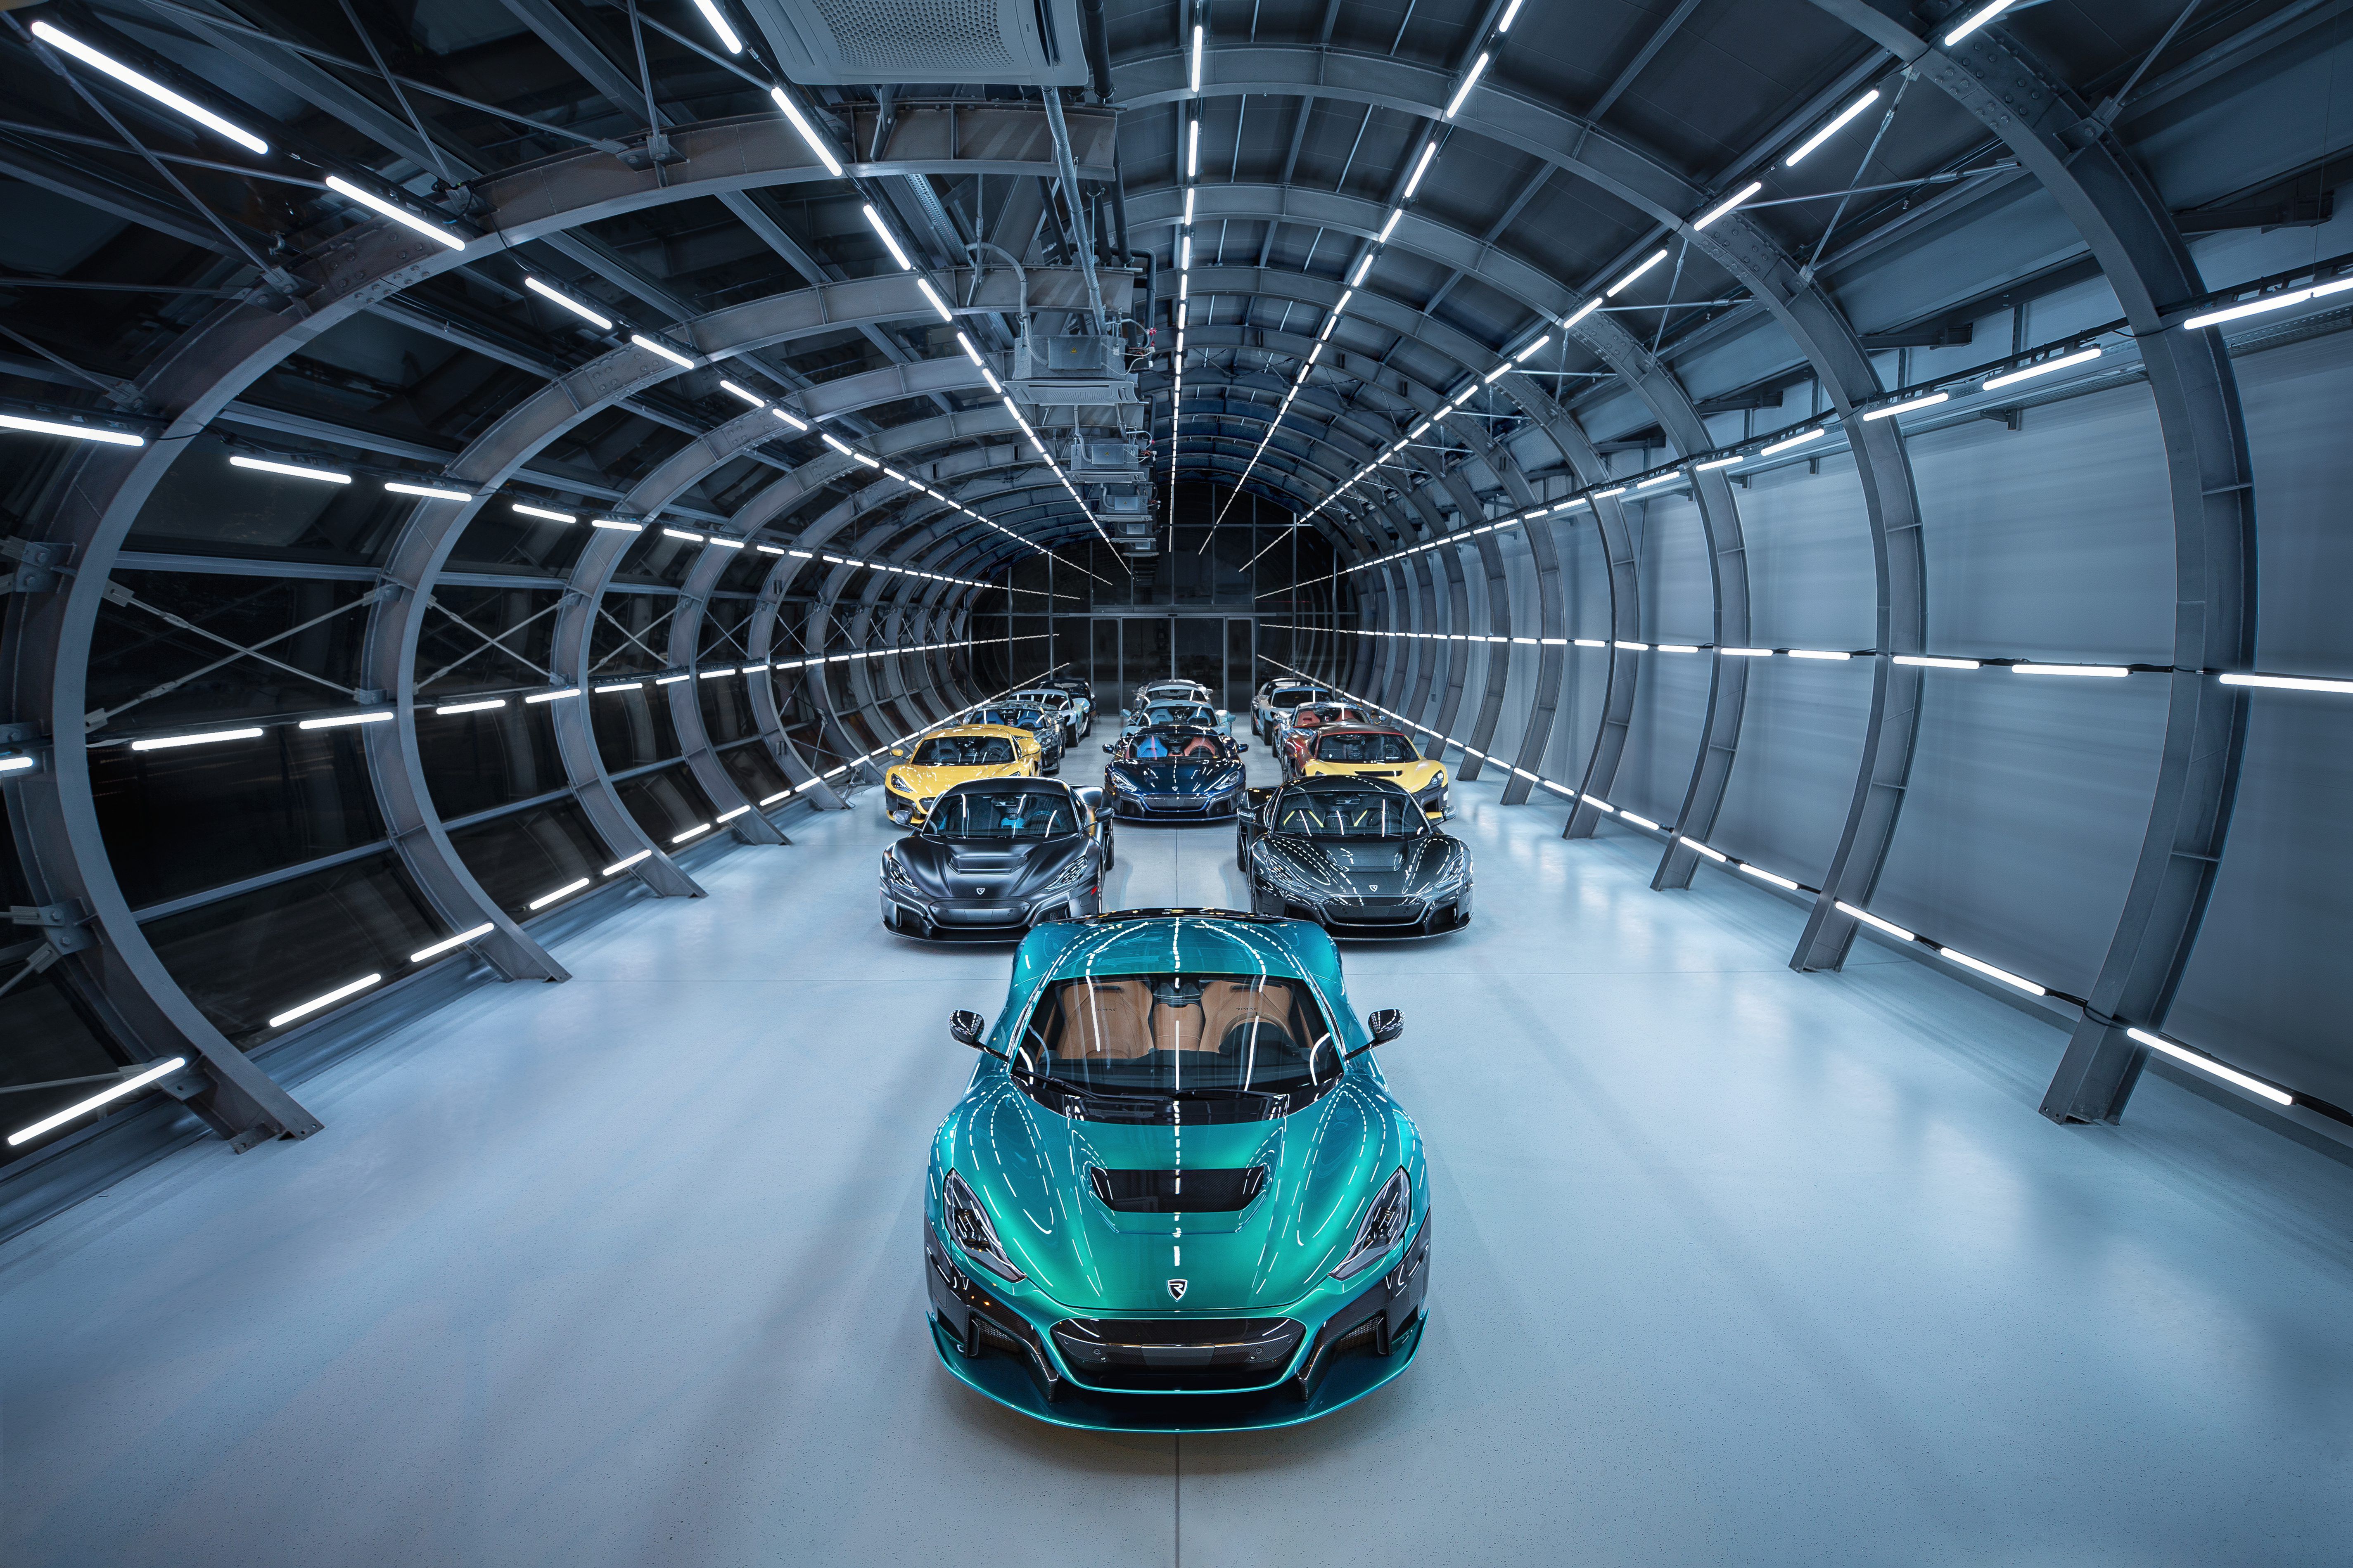 Rimac Lineup In Their Wind Tunnel